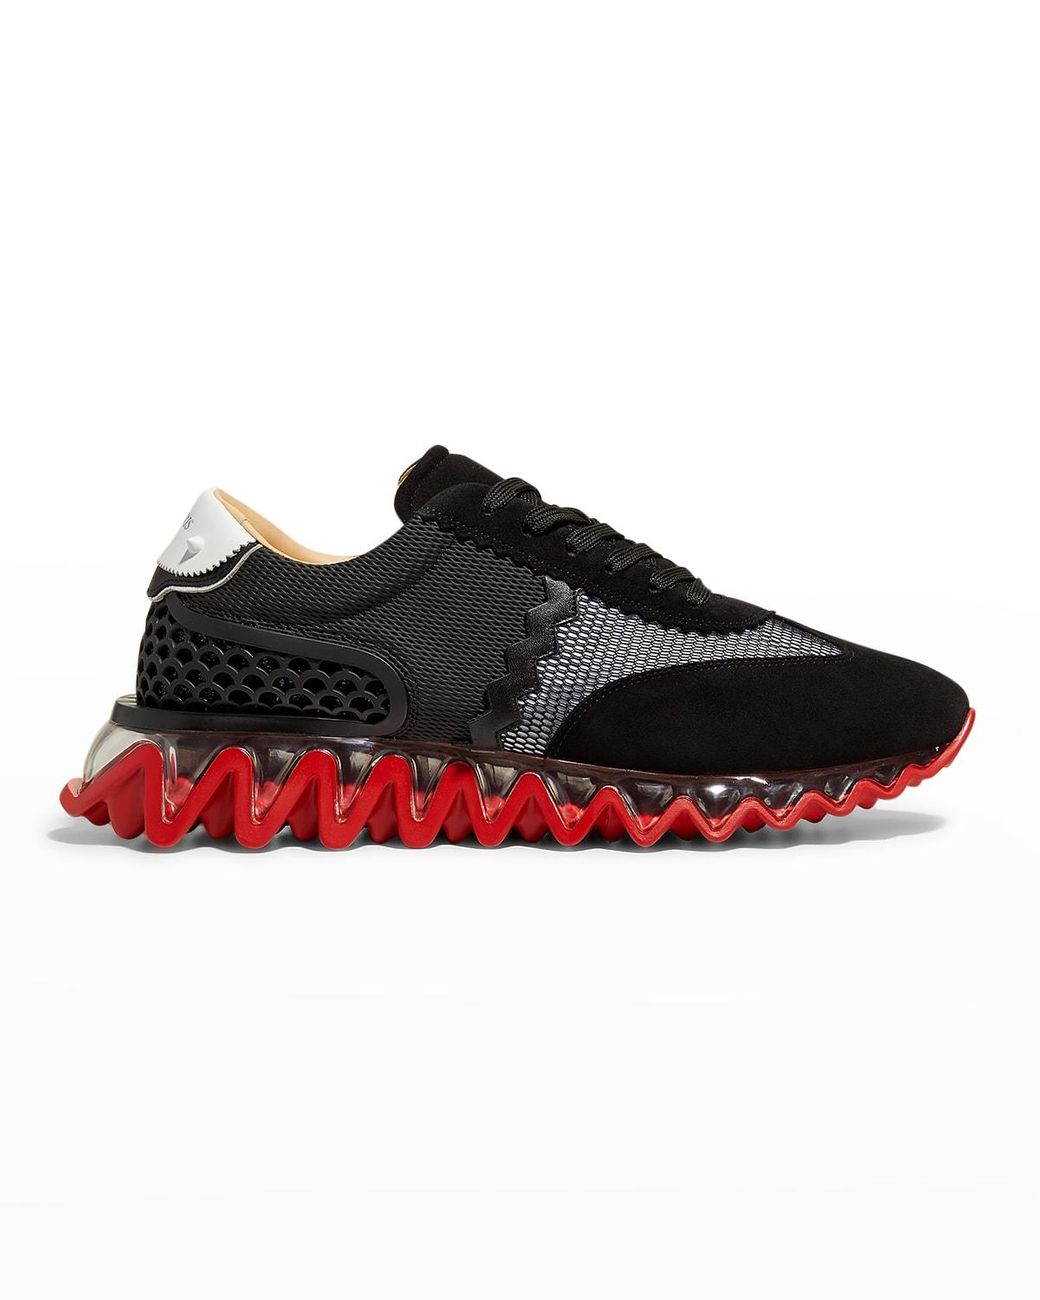 CHRISTIAN LOUBOUTIN Suede-Trimmed Leather and Mesh Sneakers for Men